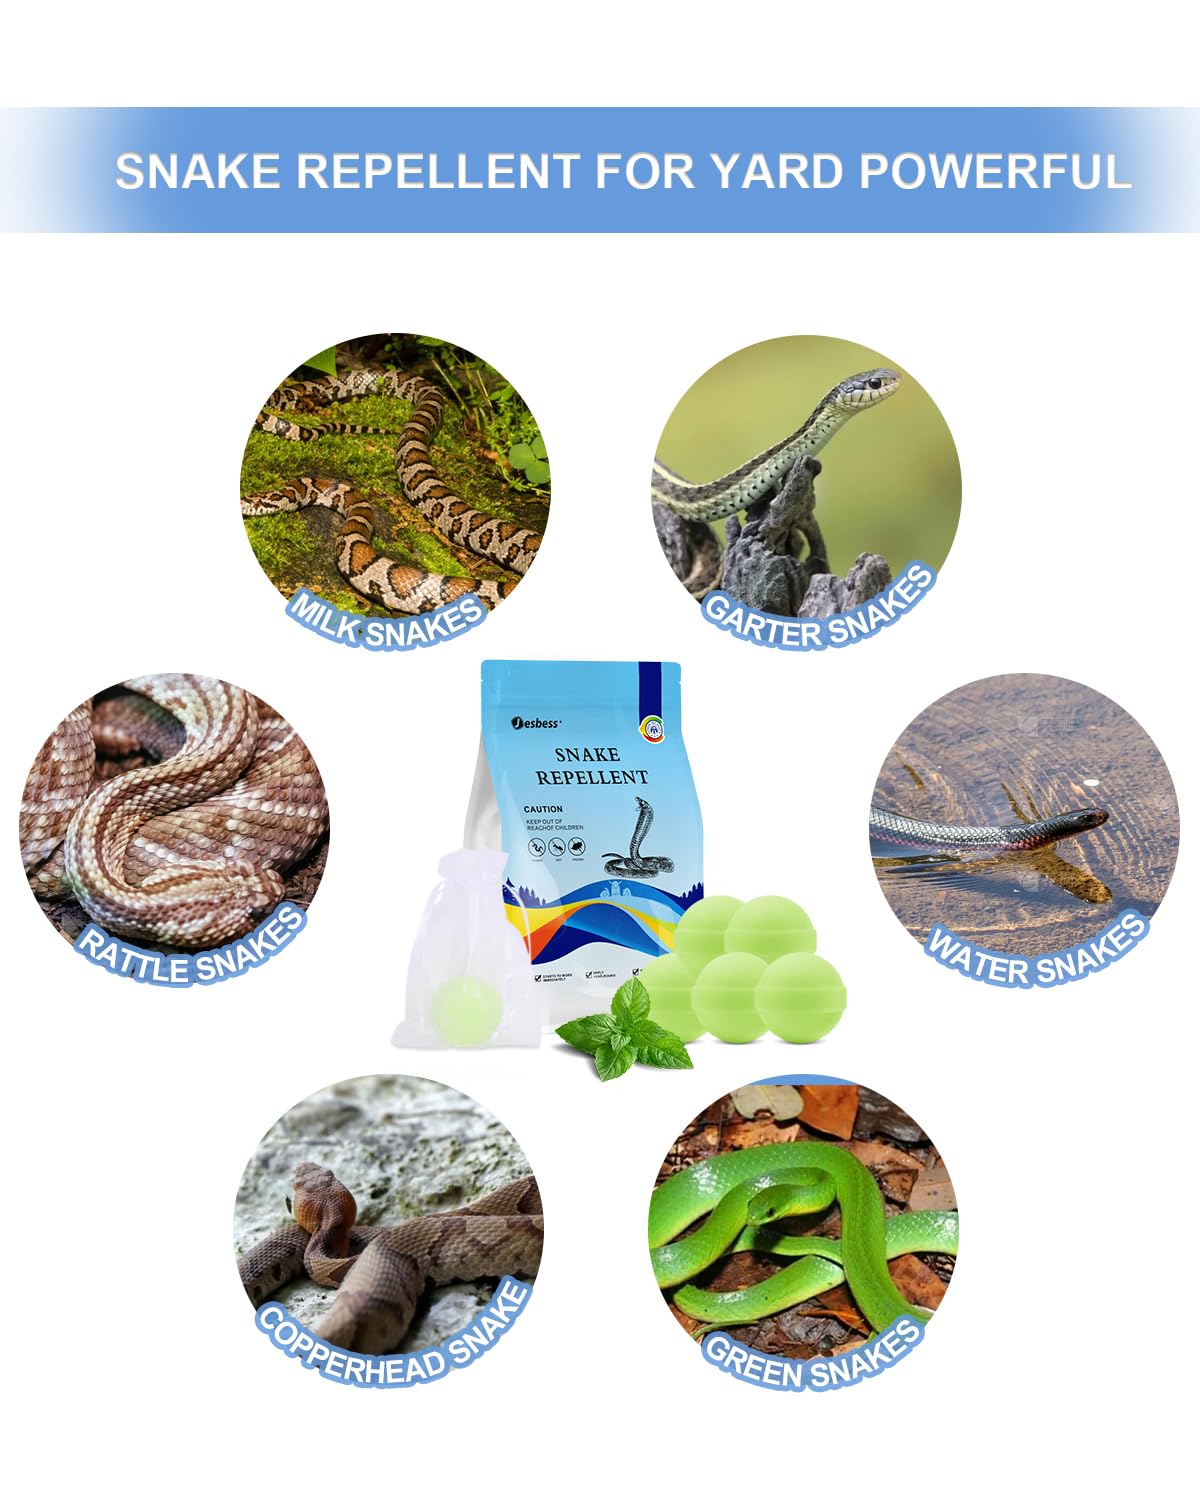 Jesbess Snake Repellent (35 Pack)- Keep Snake Away from Yard/Outdoor powerfully, Plant-Based Snake repellents are Safe for People and Pets, Snake Gone from Lawn Garden Camping Fishing Home